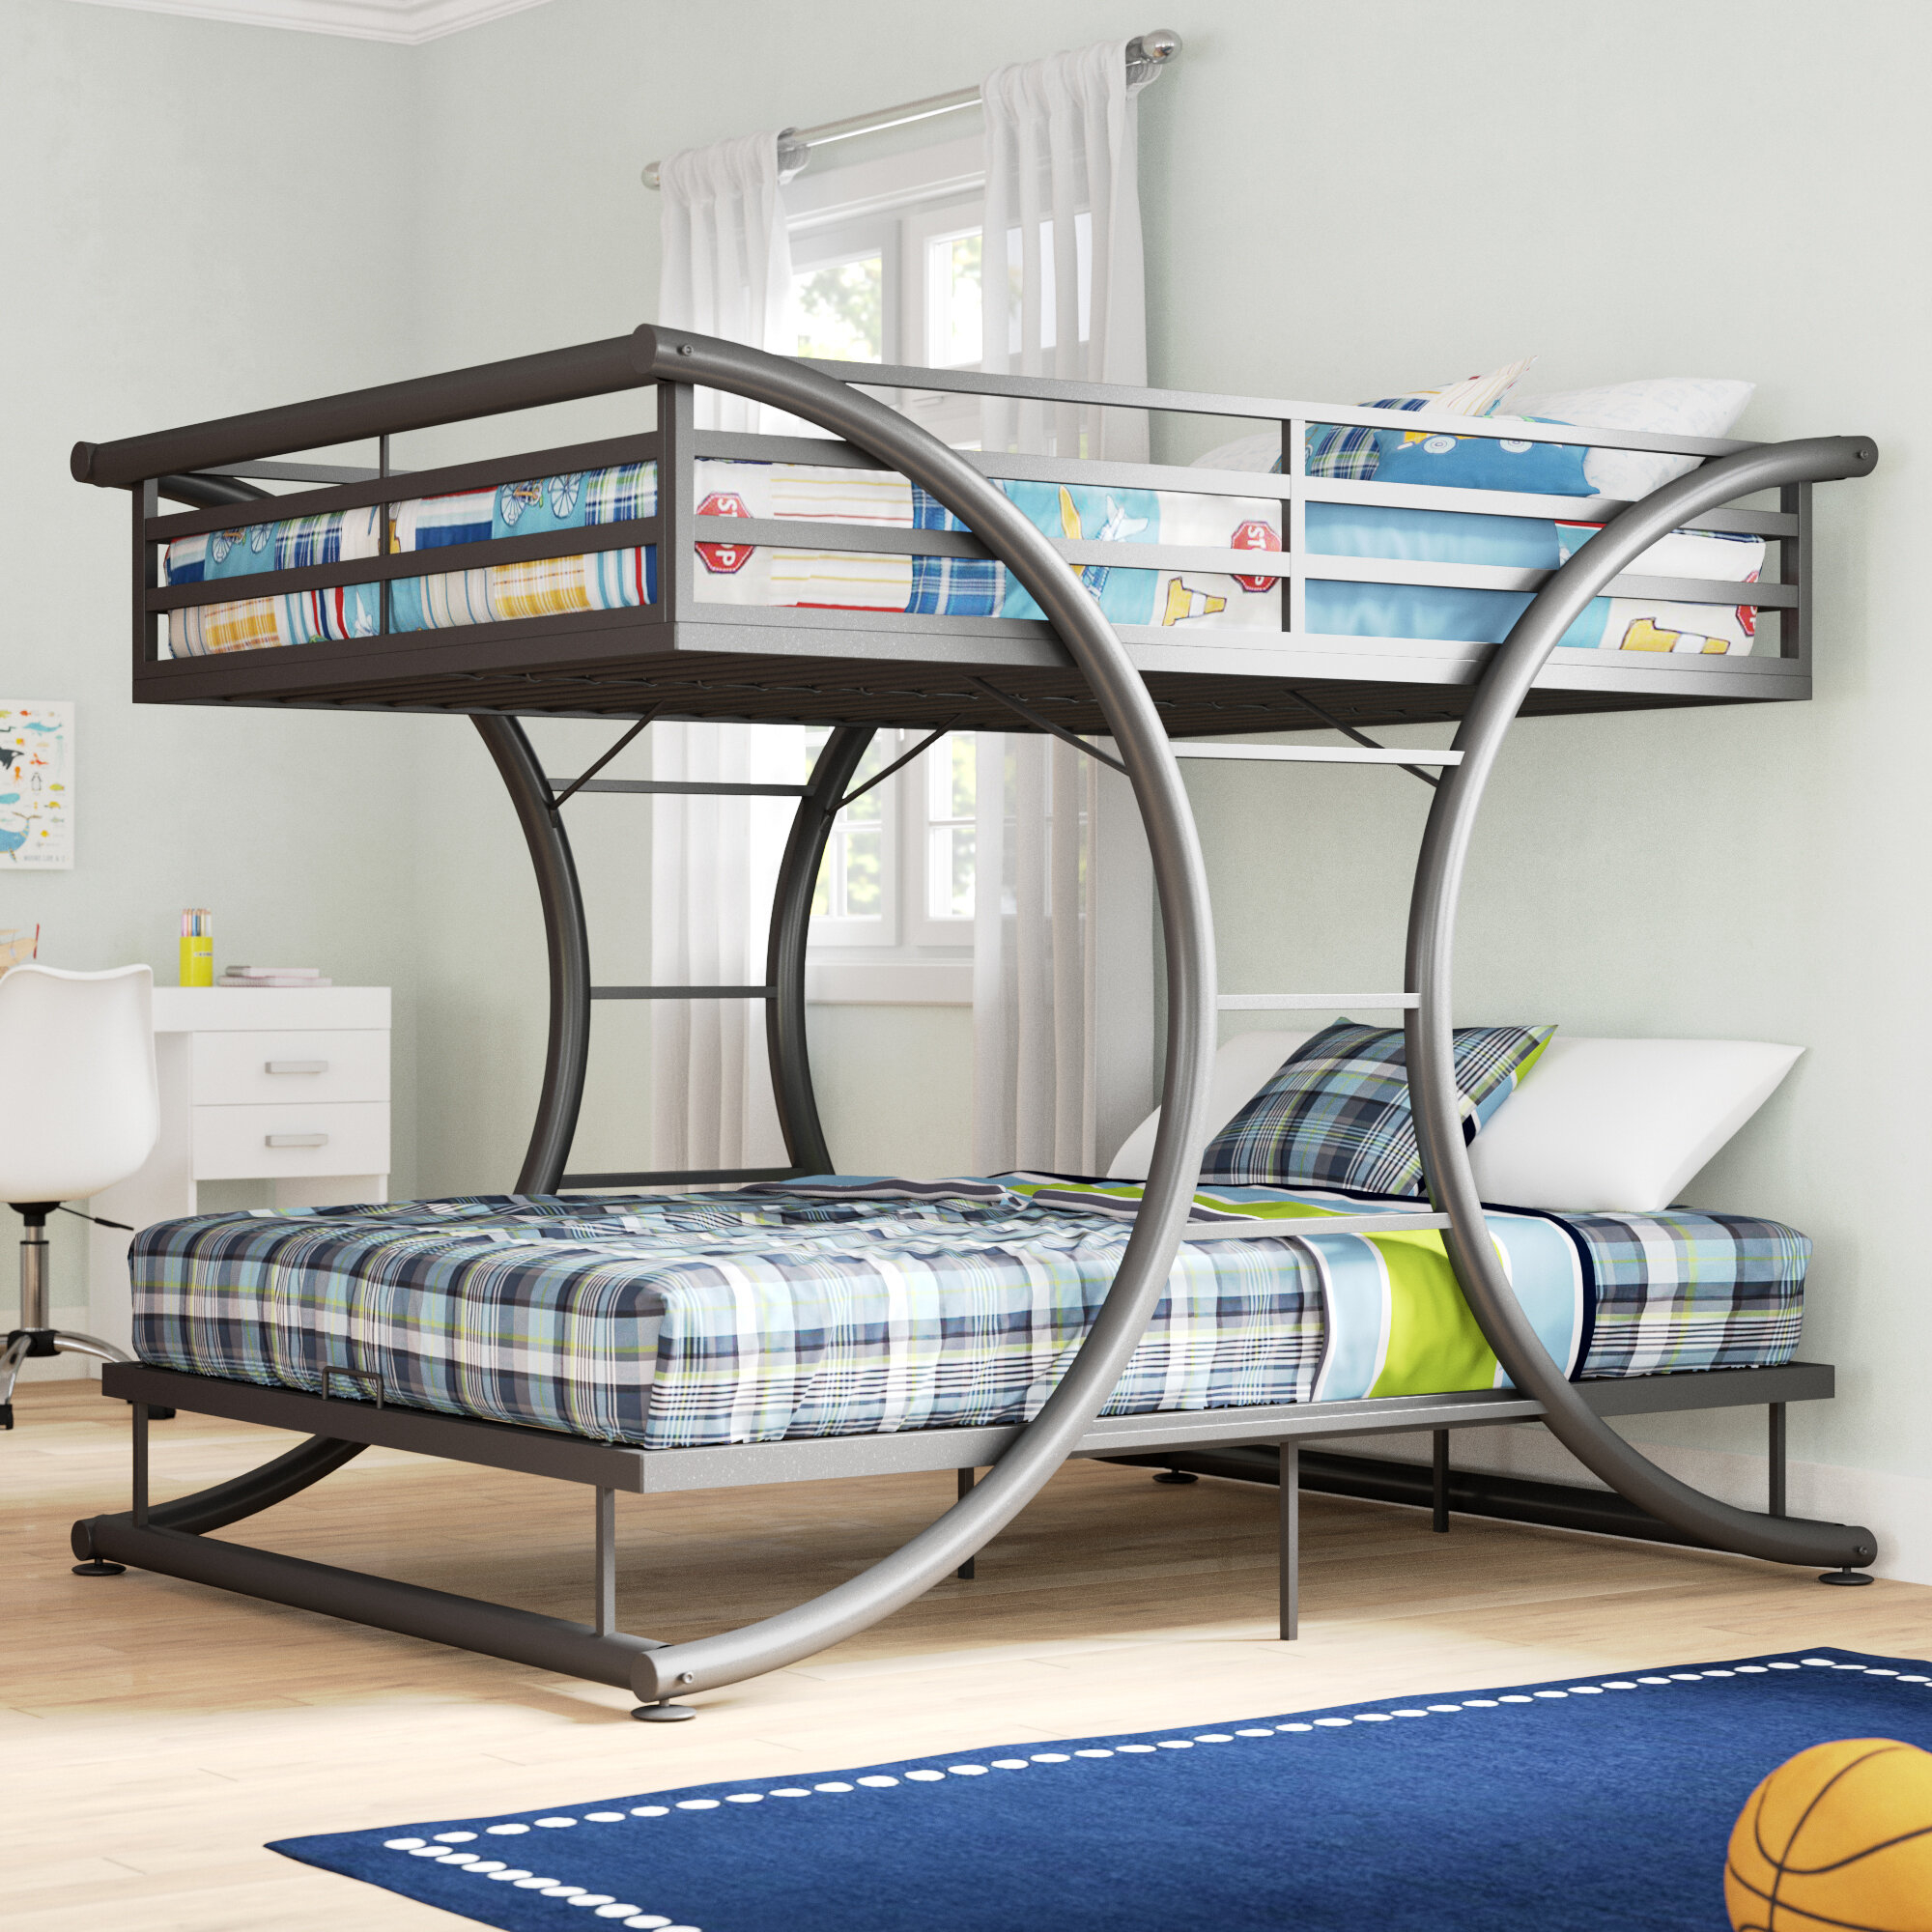 Heavy Duty Bunk Beds Visualhunt, Heavy Duty Twin Over Full Bunk Bed